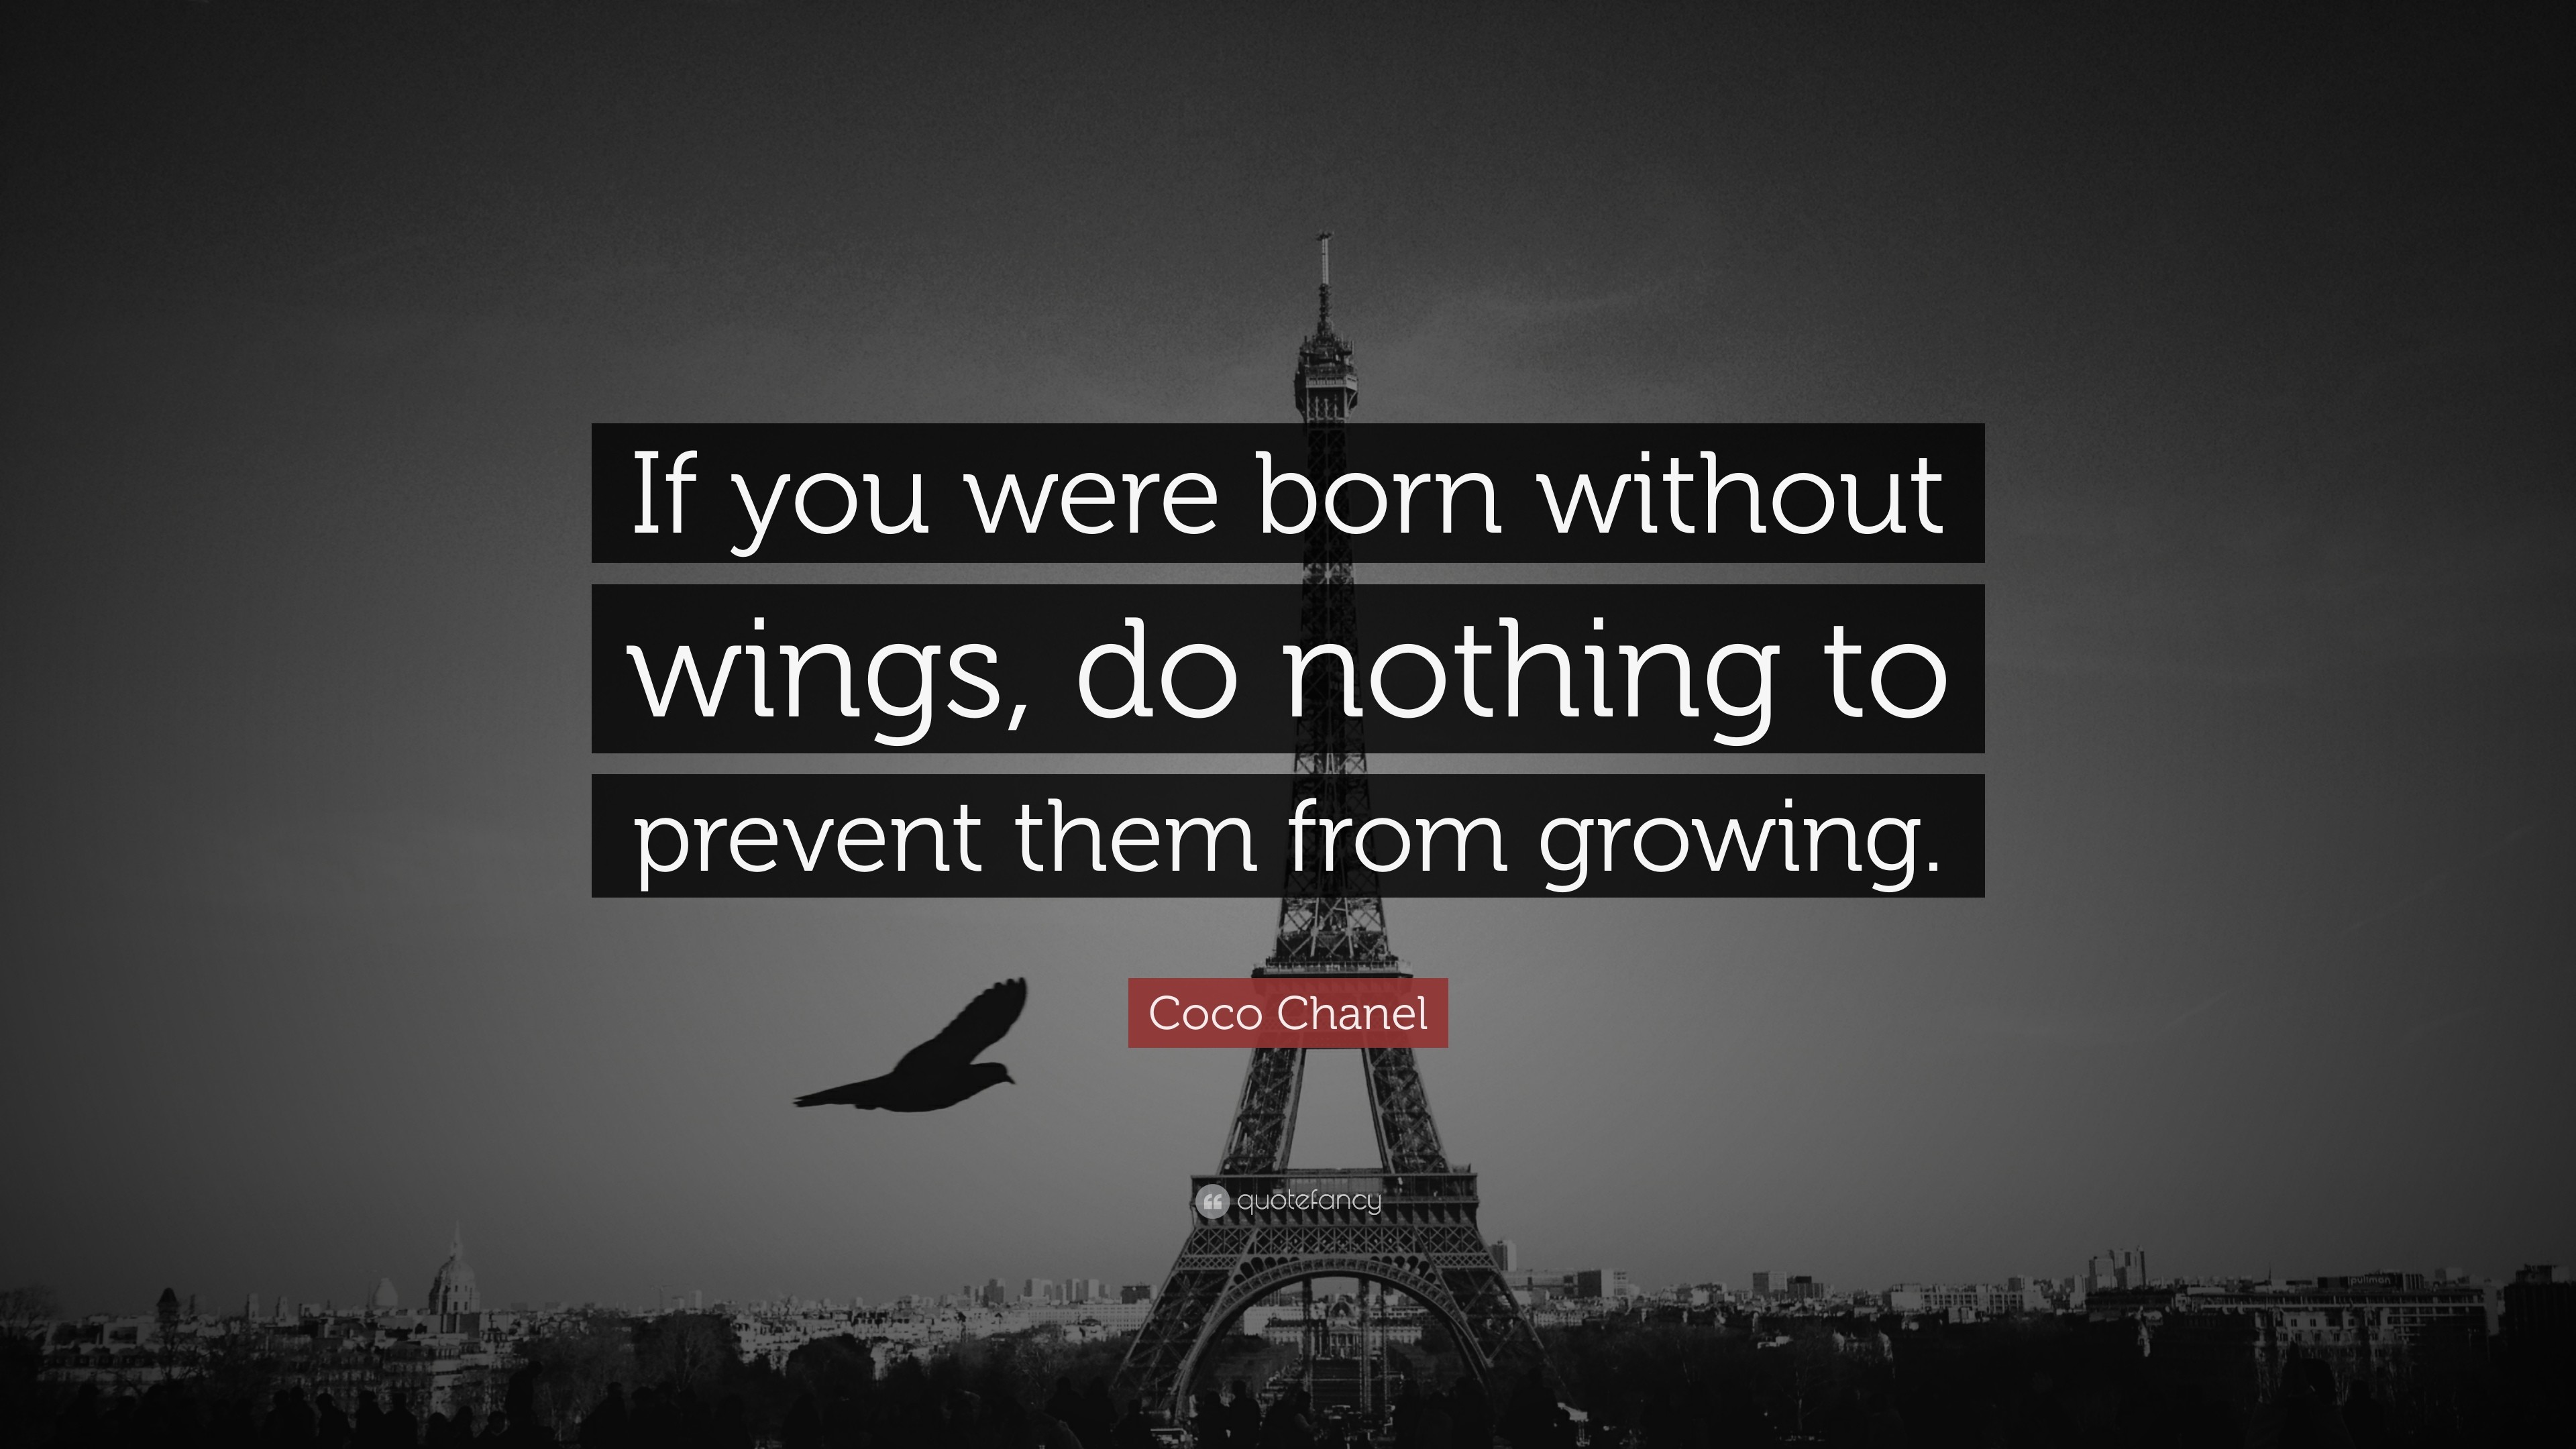 3840x2160 Coco Chanel Quote: “If you were born without wings, do nothing to prevent